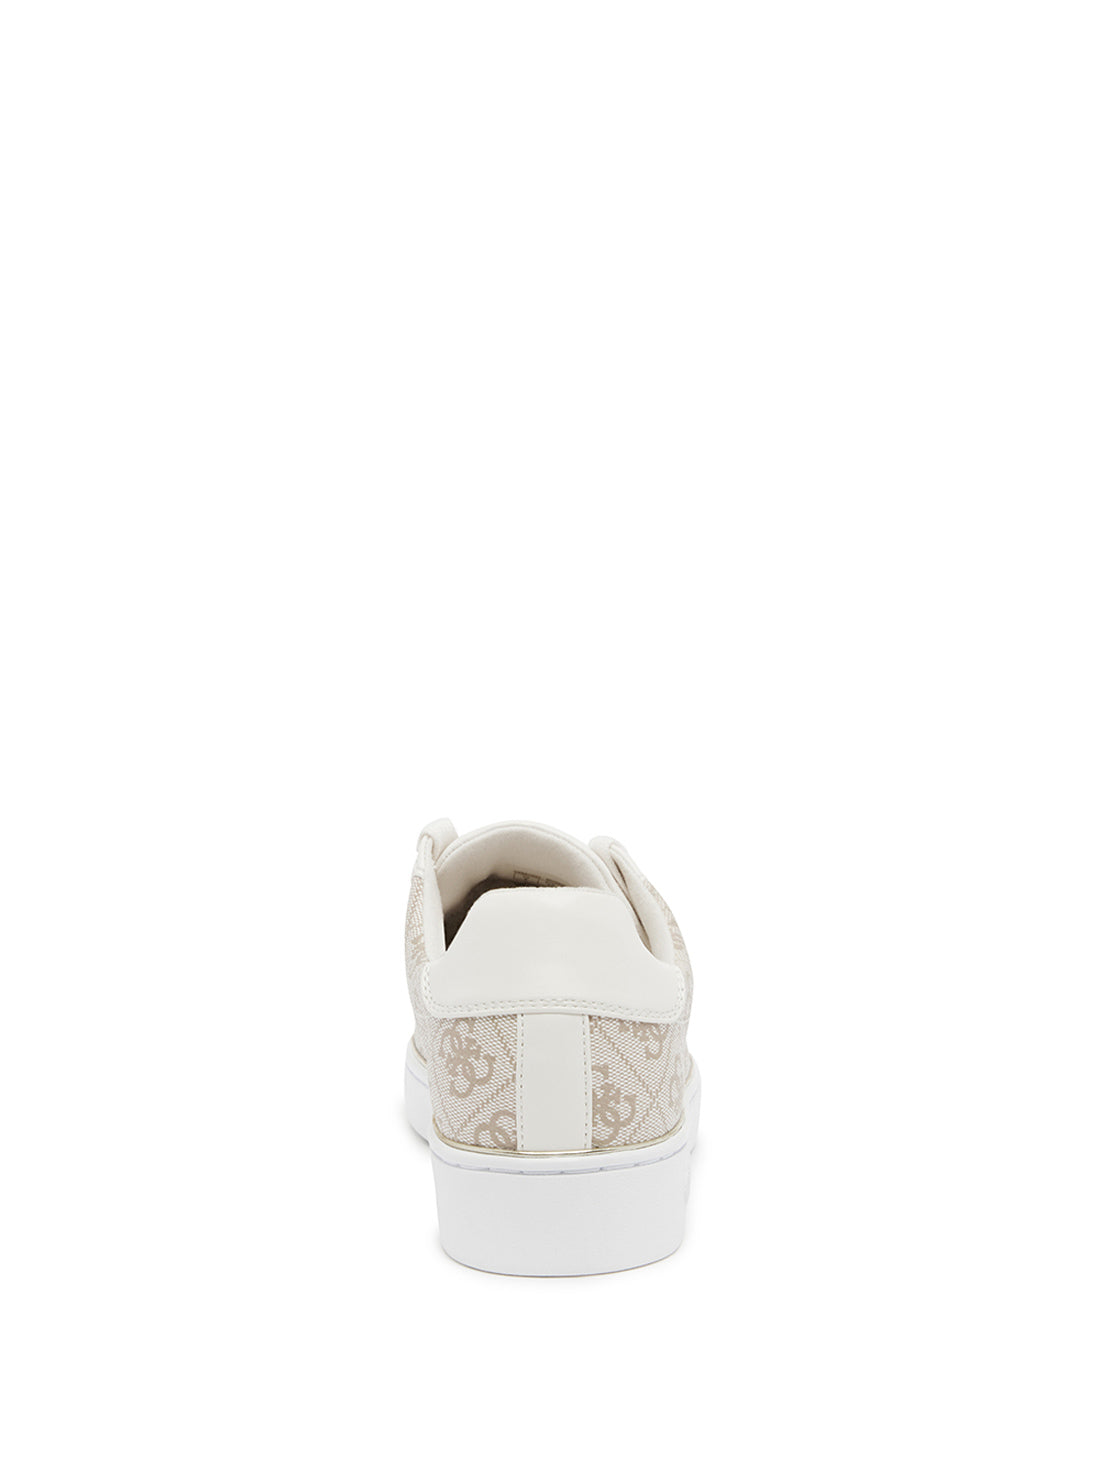 Cream Logo Beckie Sneakers | GUESS Women's Shoes | back view